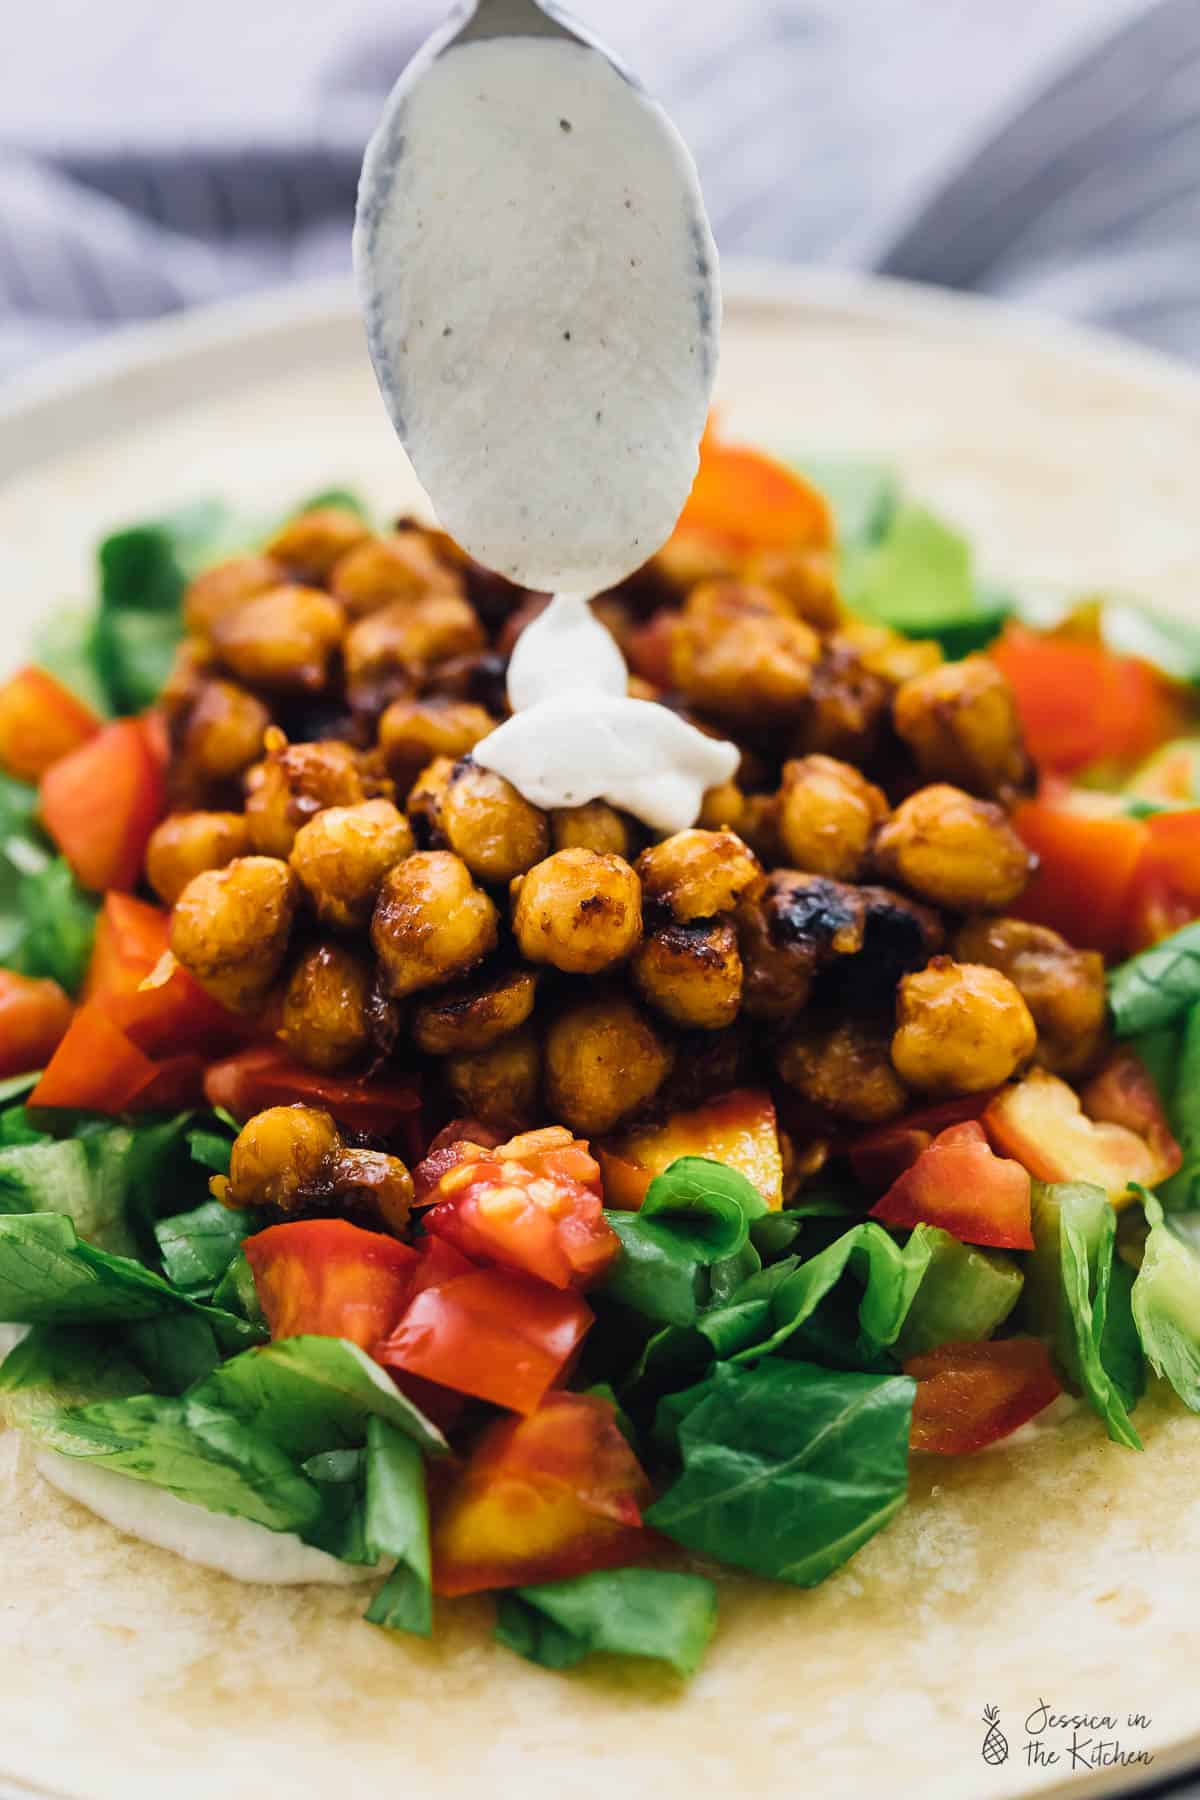 These BBQ Chickpea Wraps are an easy and quick lunch for work or meal on the go! They're swrved with a creamy ranch dressing and very filling! via https://jessicainthekitchen.com